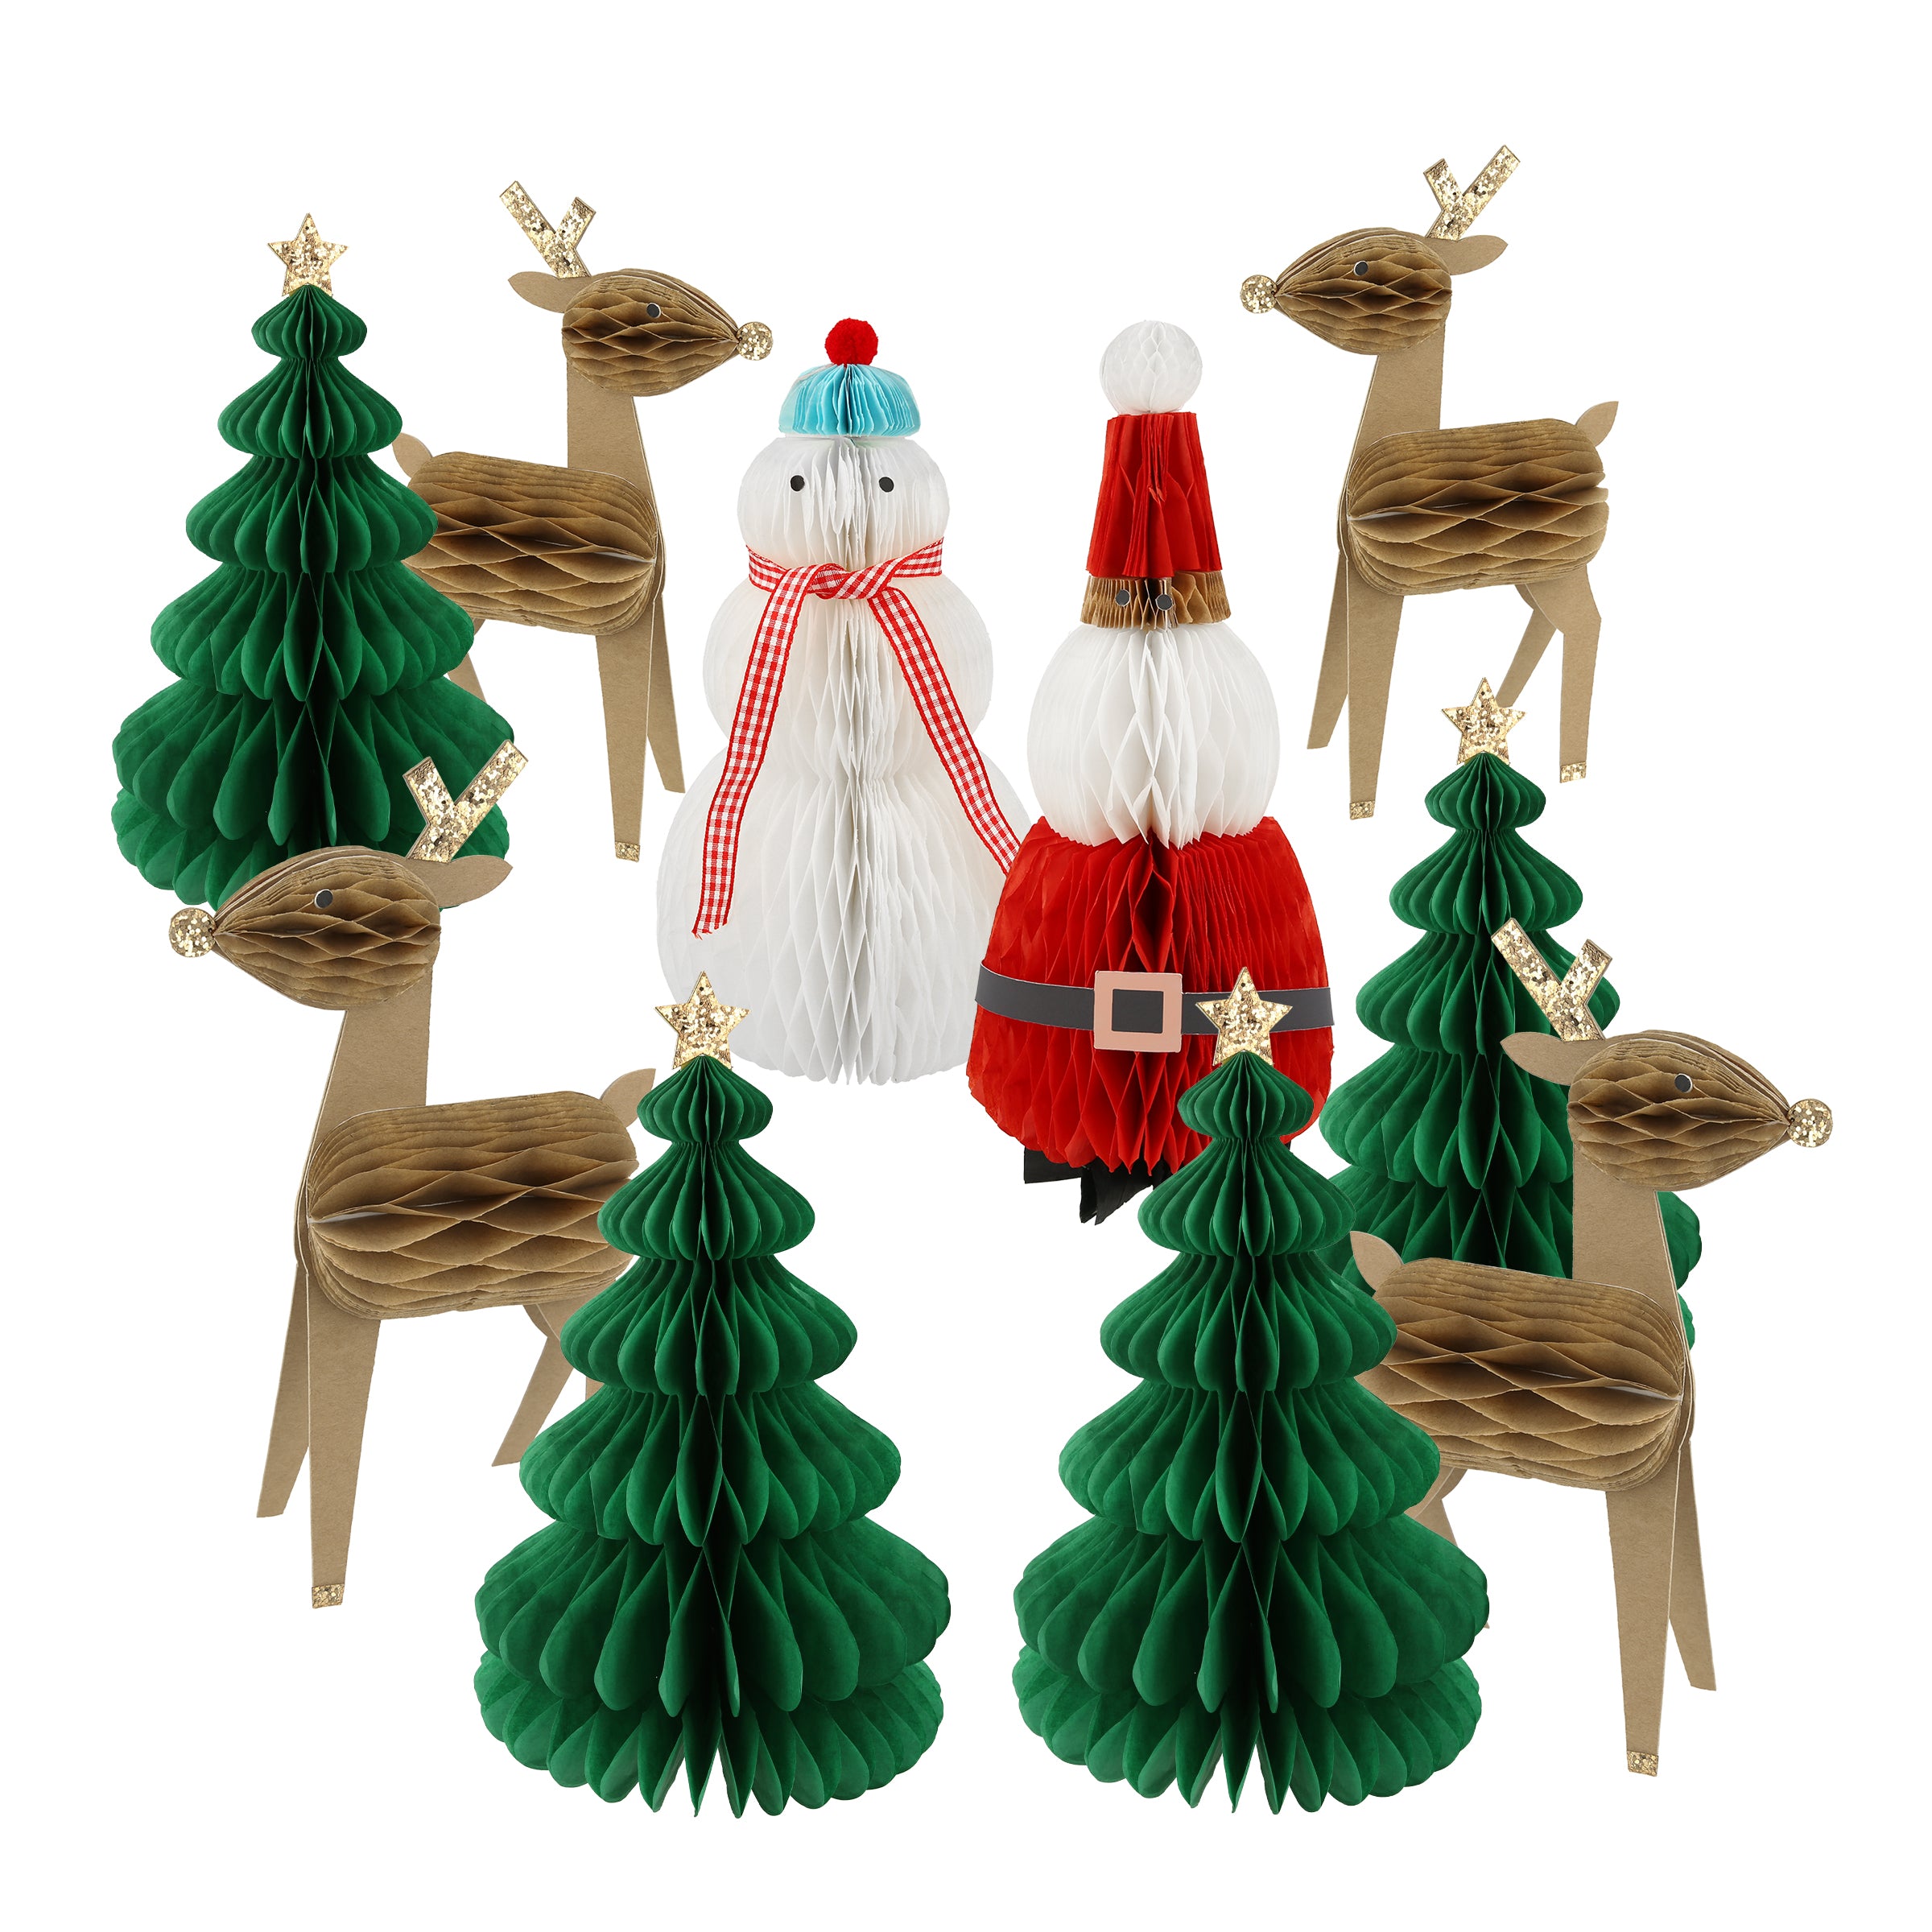 Our honeycomb Christmas table decorations include Christmas trees, Santa, reindeer and a snowman.